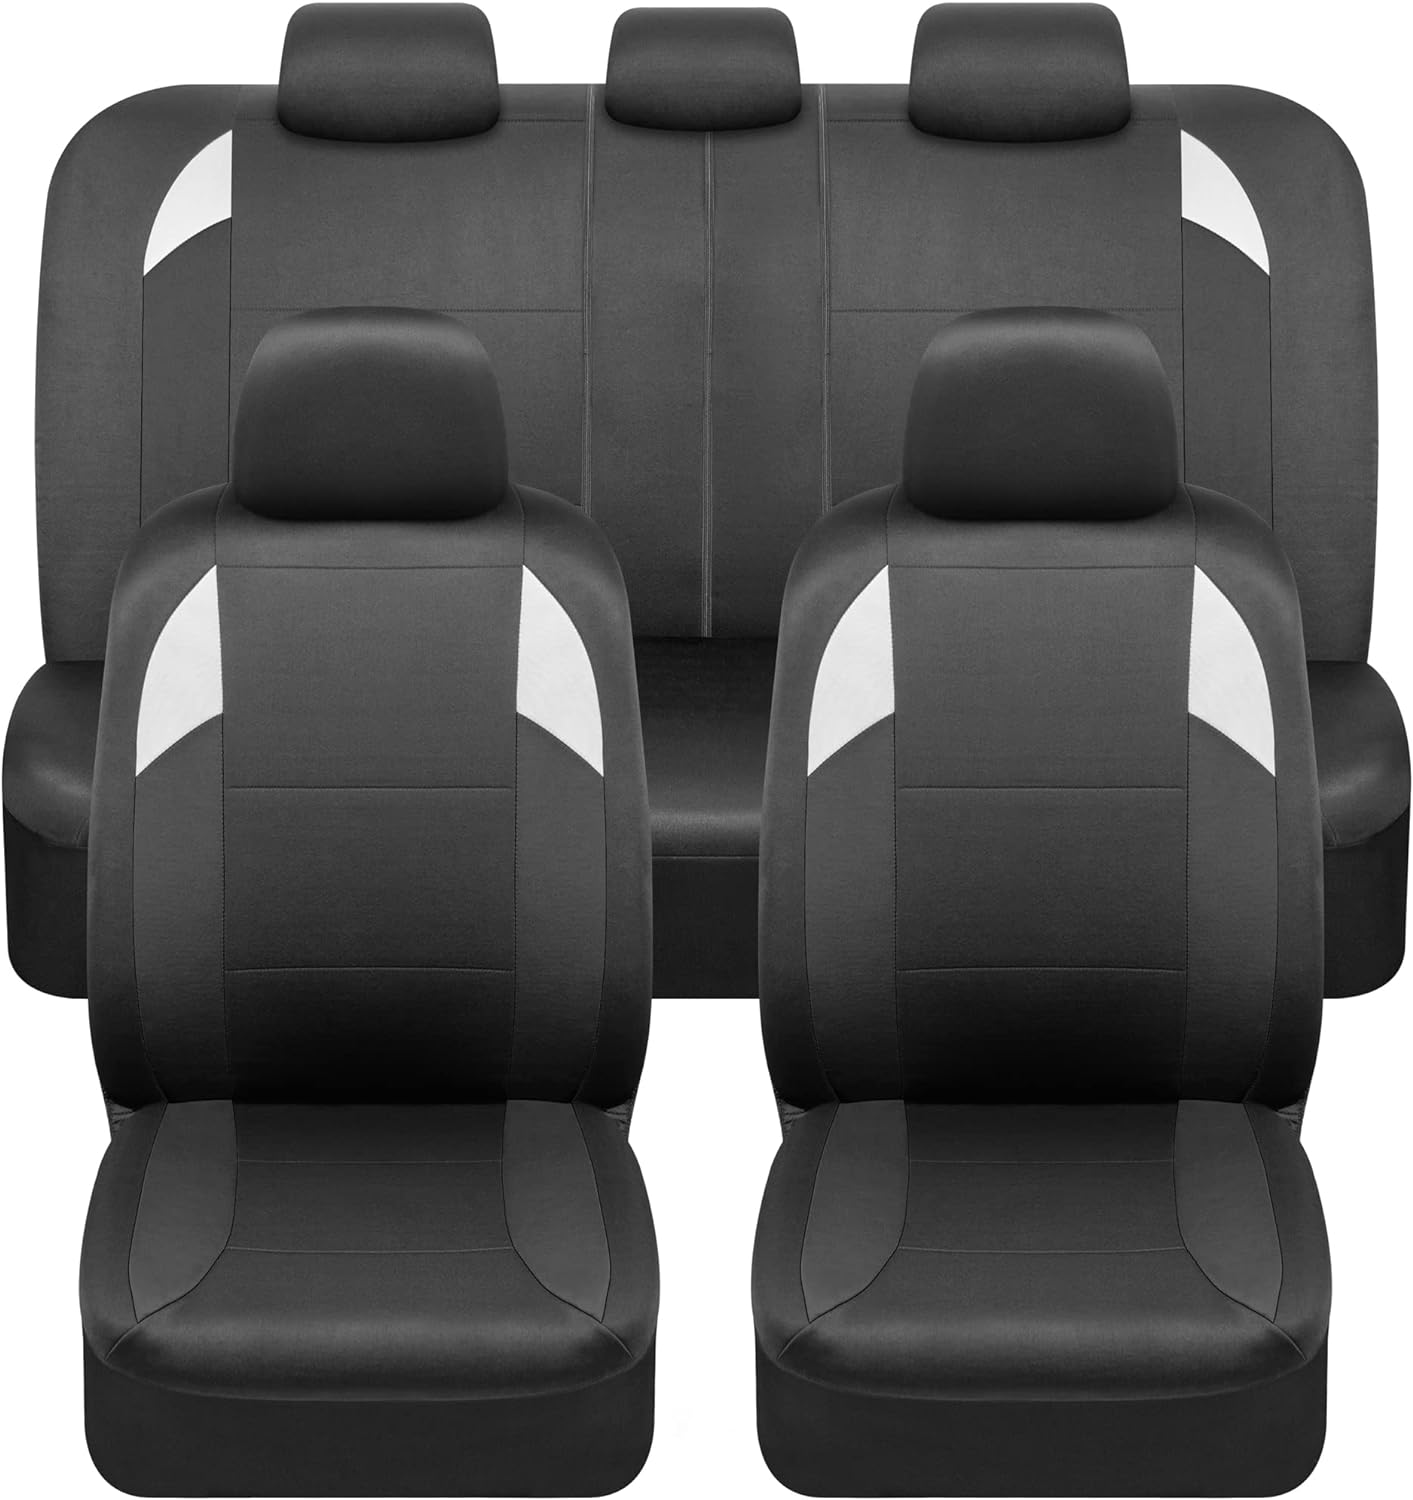 BDK carXS Monaco Seat Covers for Cars Full Set, Beige Tri-Tone Front Car Seat Covers with Split Rear Bench Back Seat Cover, Automotive Seat Covers for Trucks SUV Van Auto (Multiple Colors)